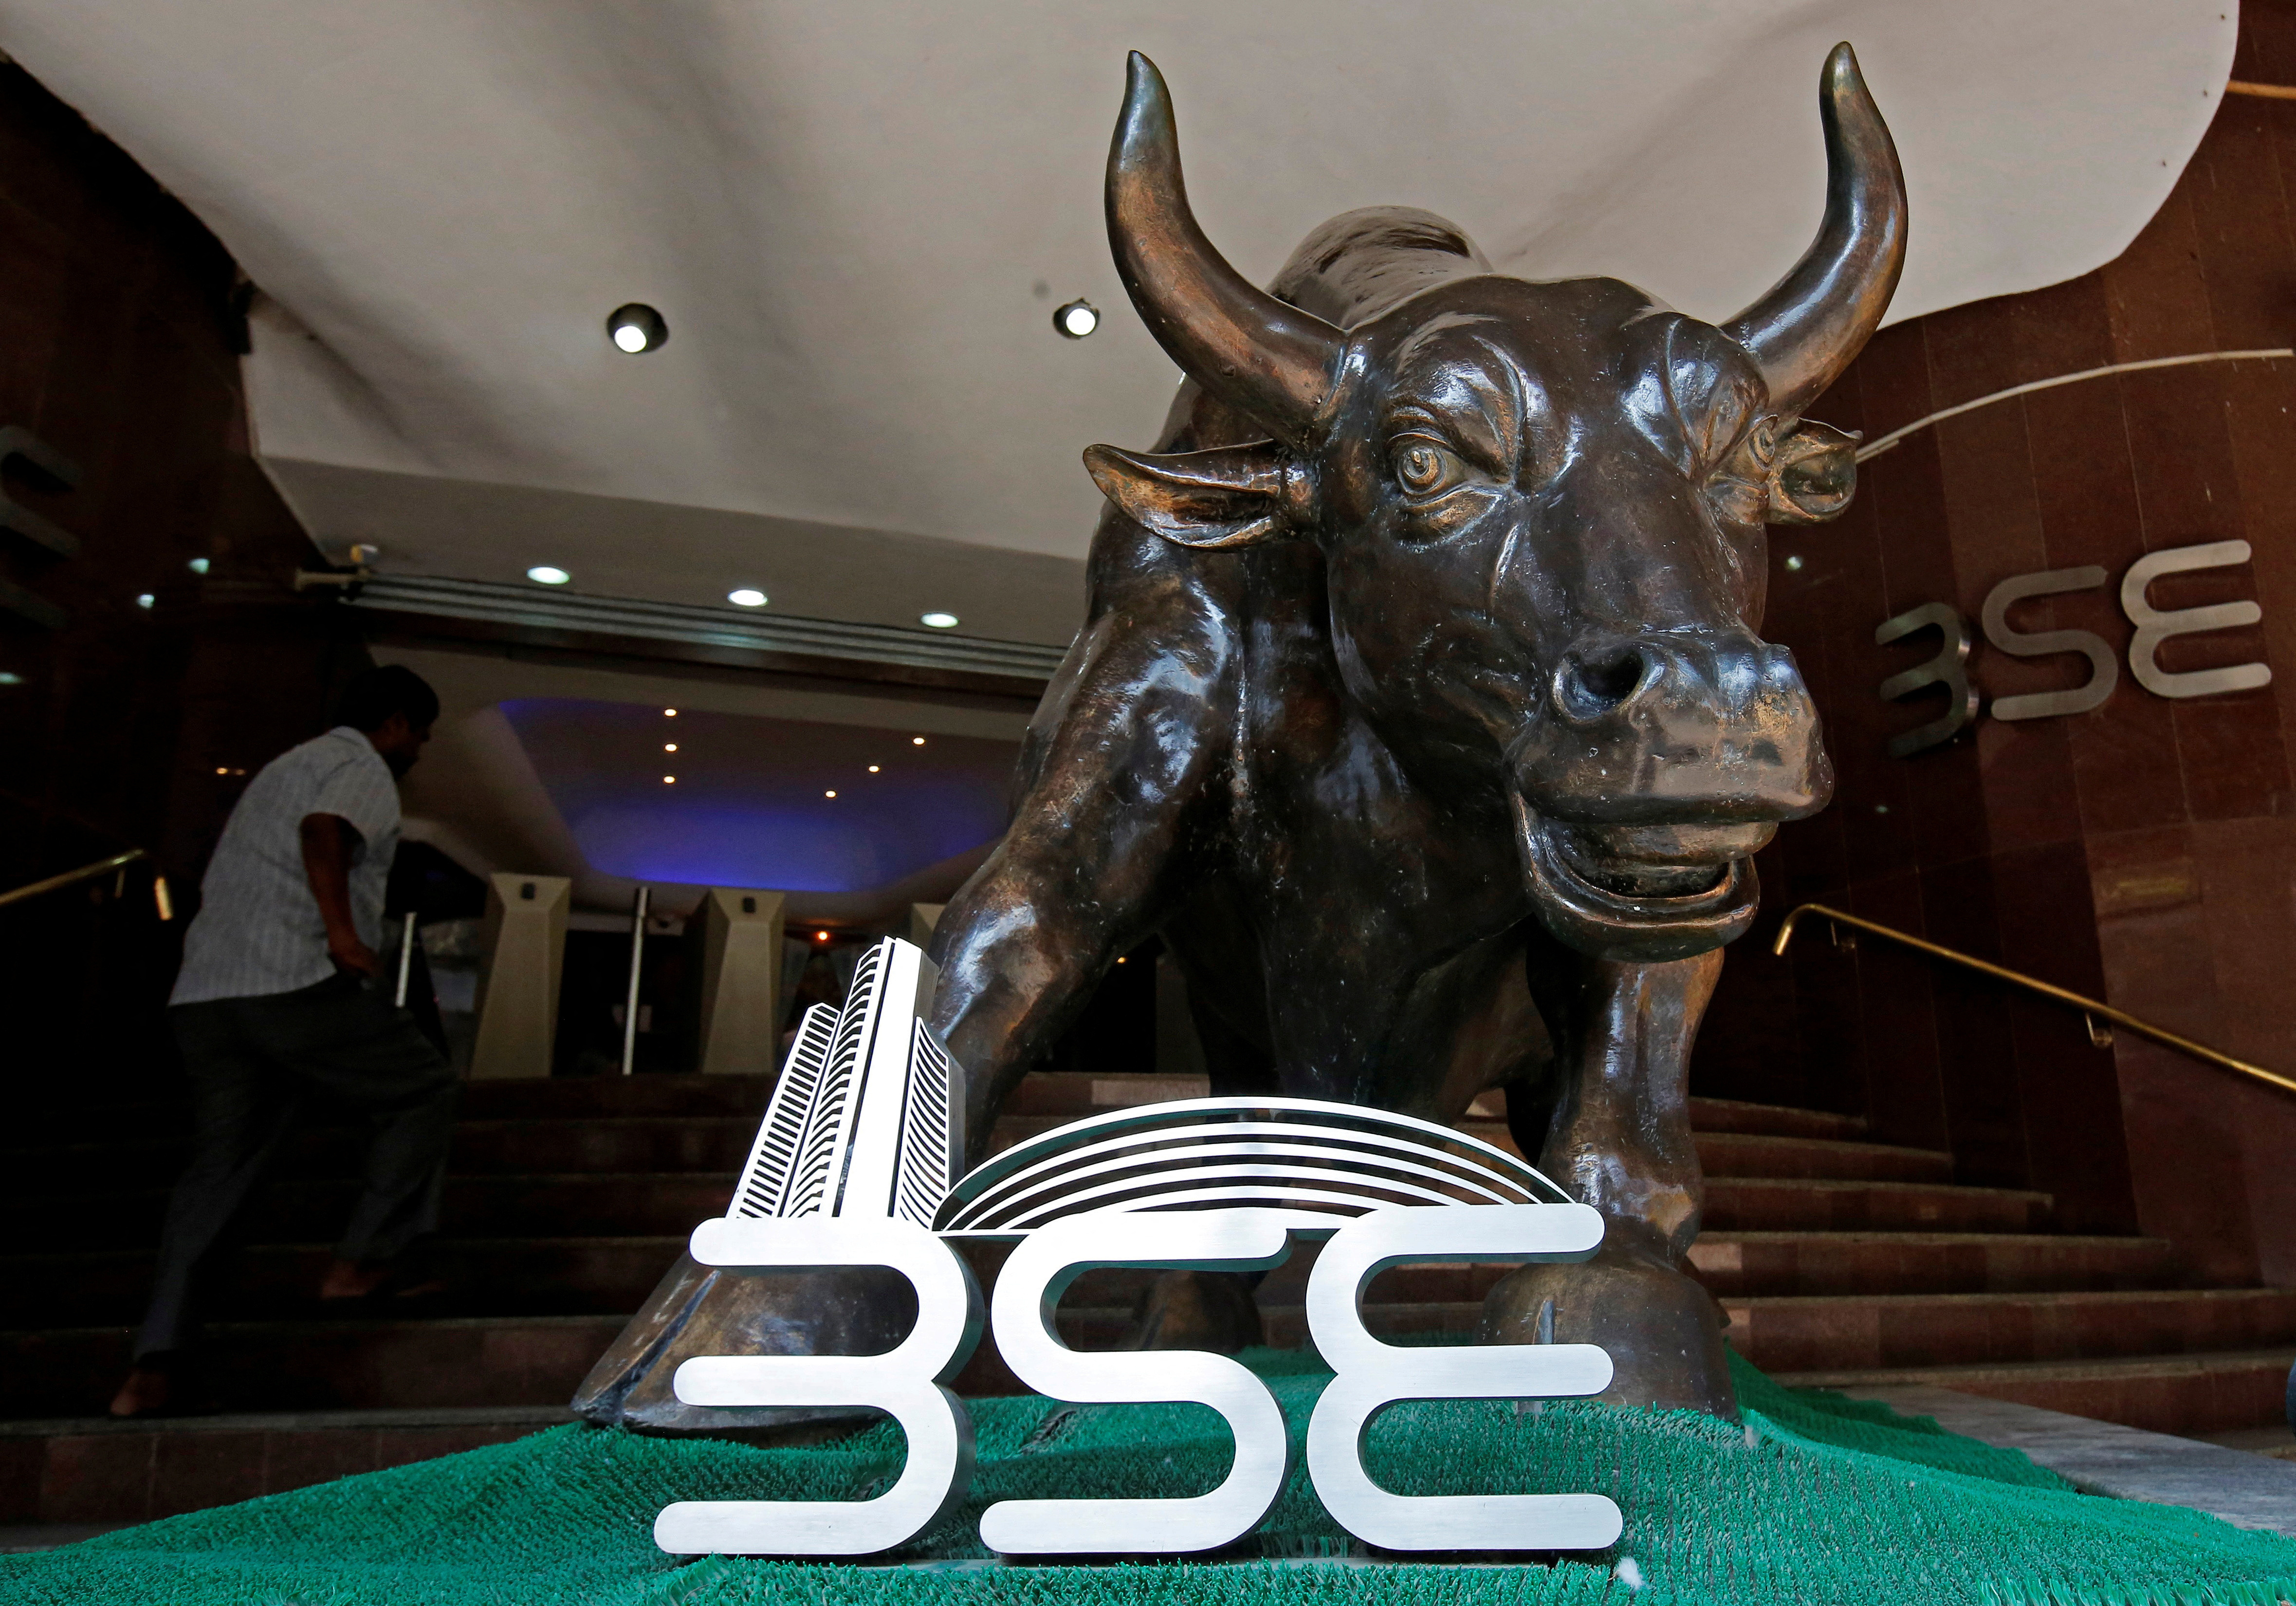 The Bombay Stock Exchange (BSE) logo is seen under a bull statue at the entrance of their building in Mumbai